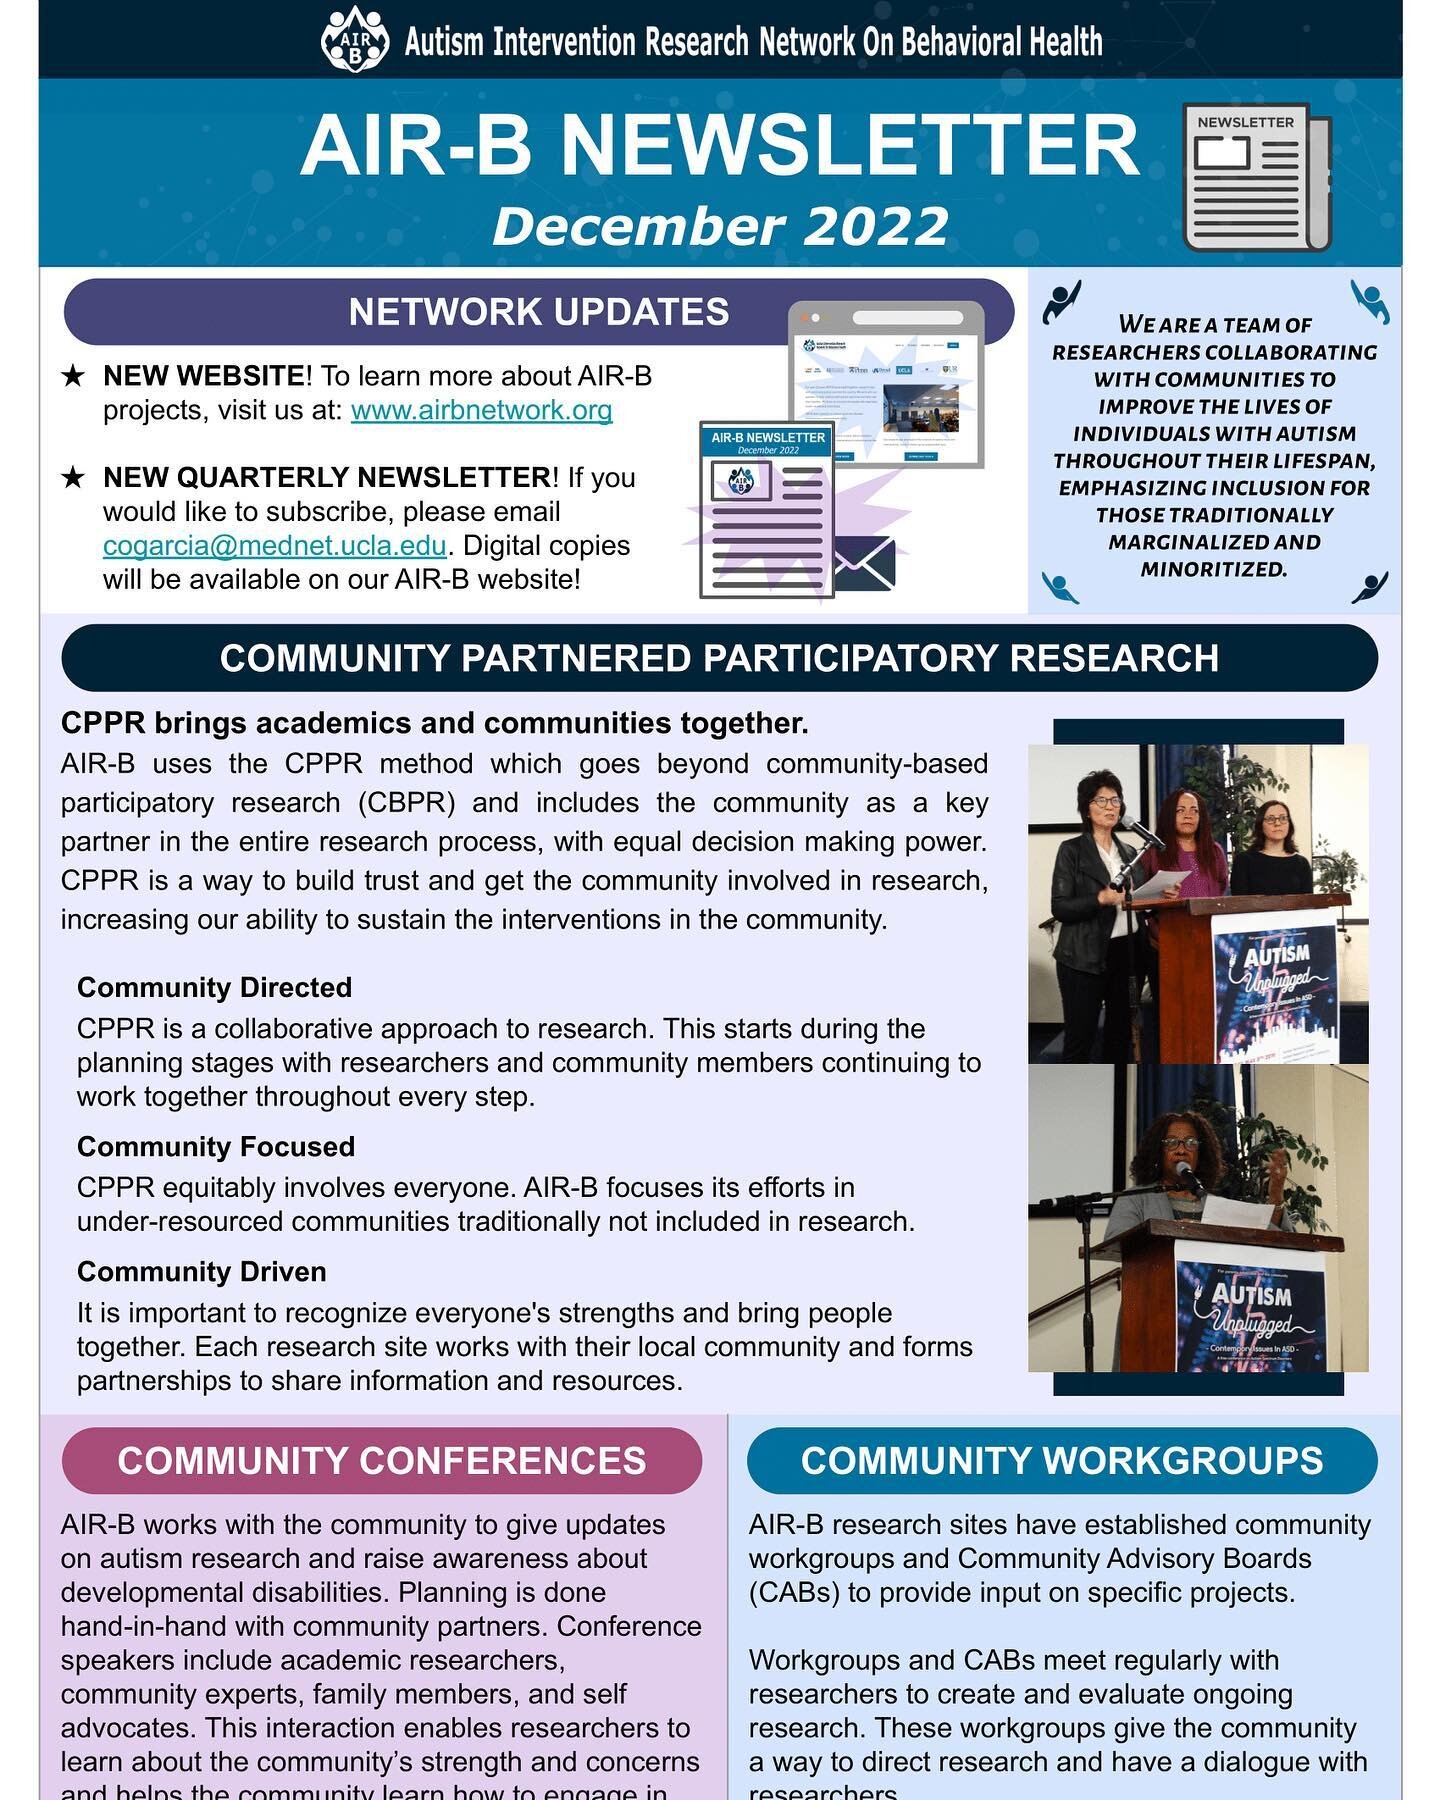 The AIR-B Networks&rsquo;s December 2022 Newsletter! Check out  https://www.airbnetwork.org/ for more AIR-B related updates!📰🗞️